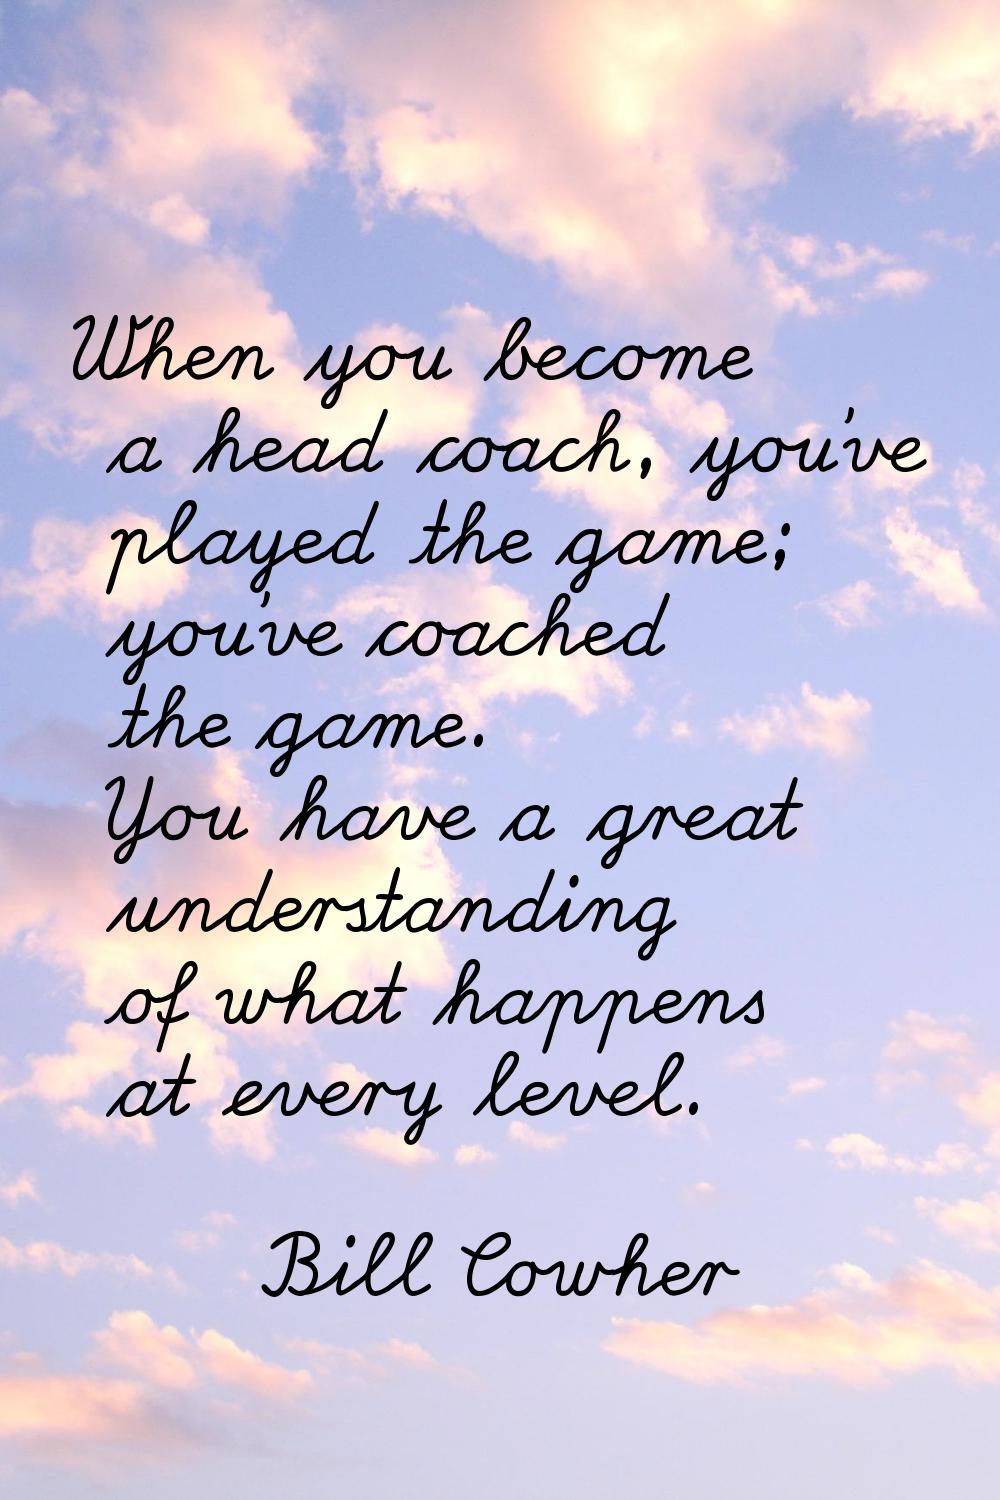 When you become a head coach, you've played the game; you've coached the game. You have a great und